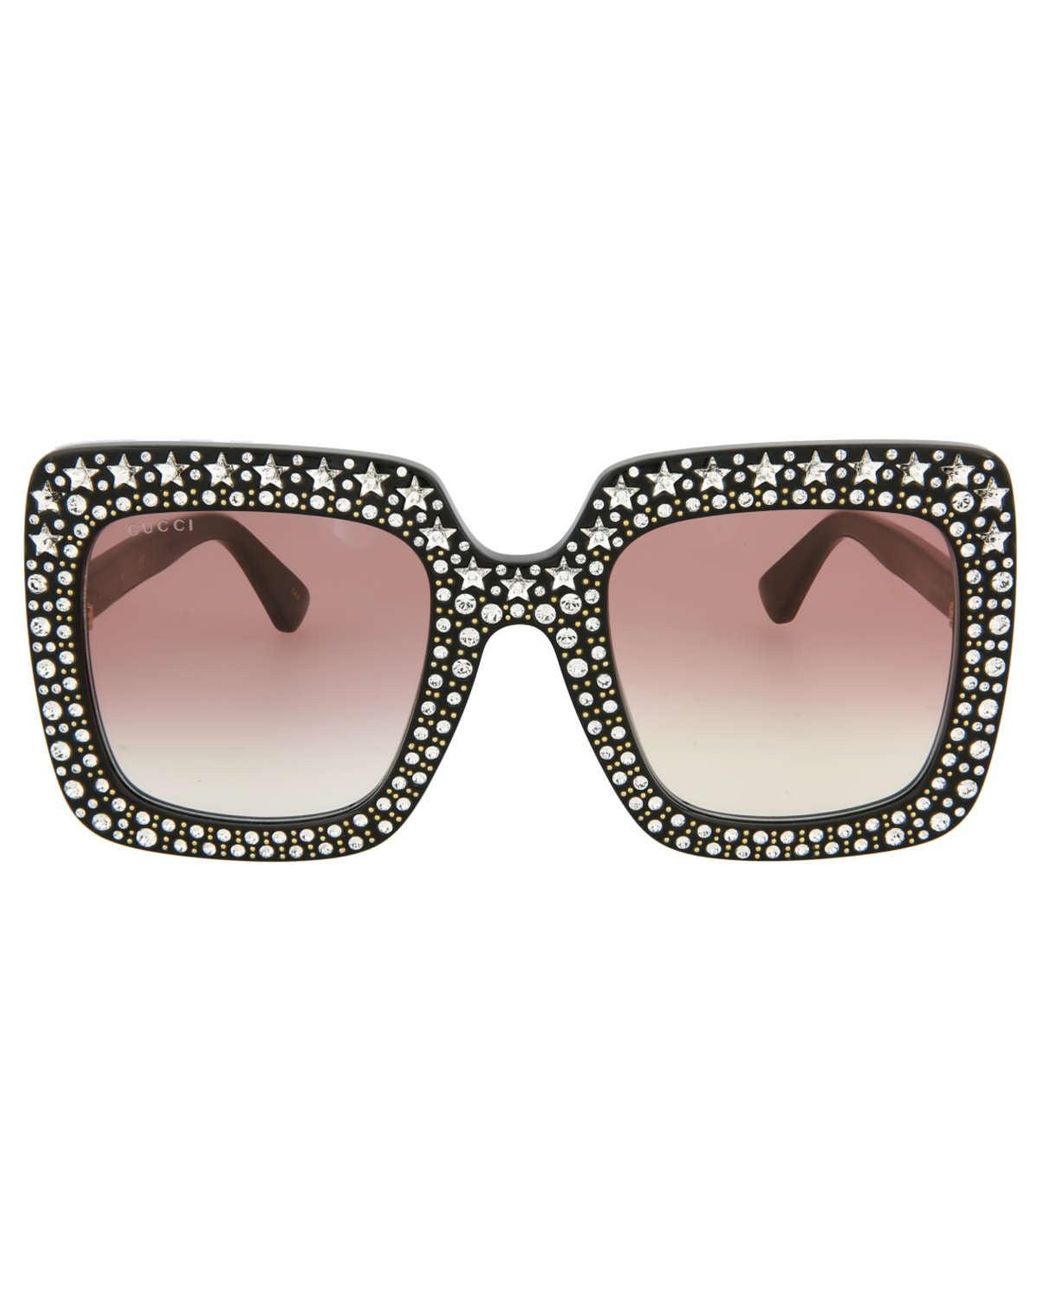 Gucci Square-frame Acetate Sunglasses GG0148S-005 in Pink | Lyst